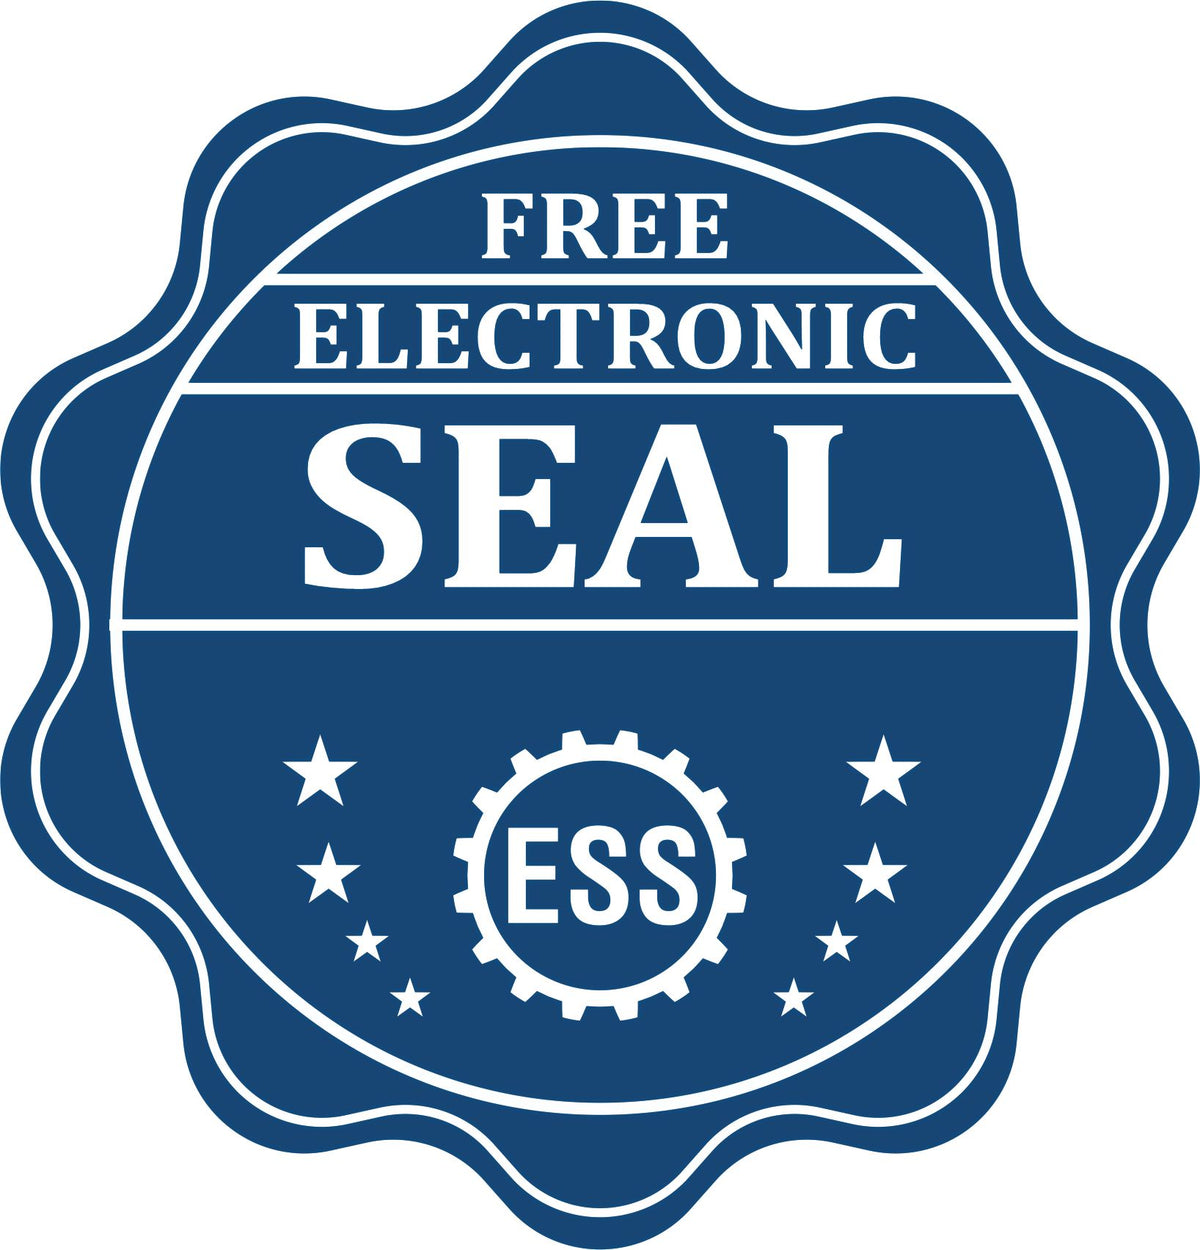 A badge showing a free electronic seal for the Hybrid Iowa Landscape Architect Seal with stars and the ESS gear on the emblem.